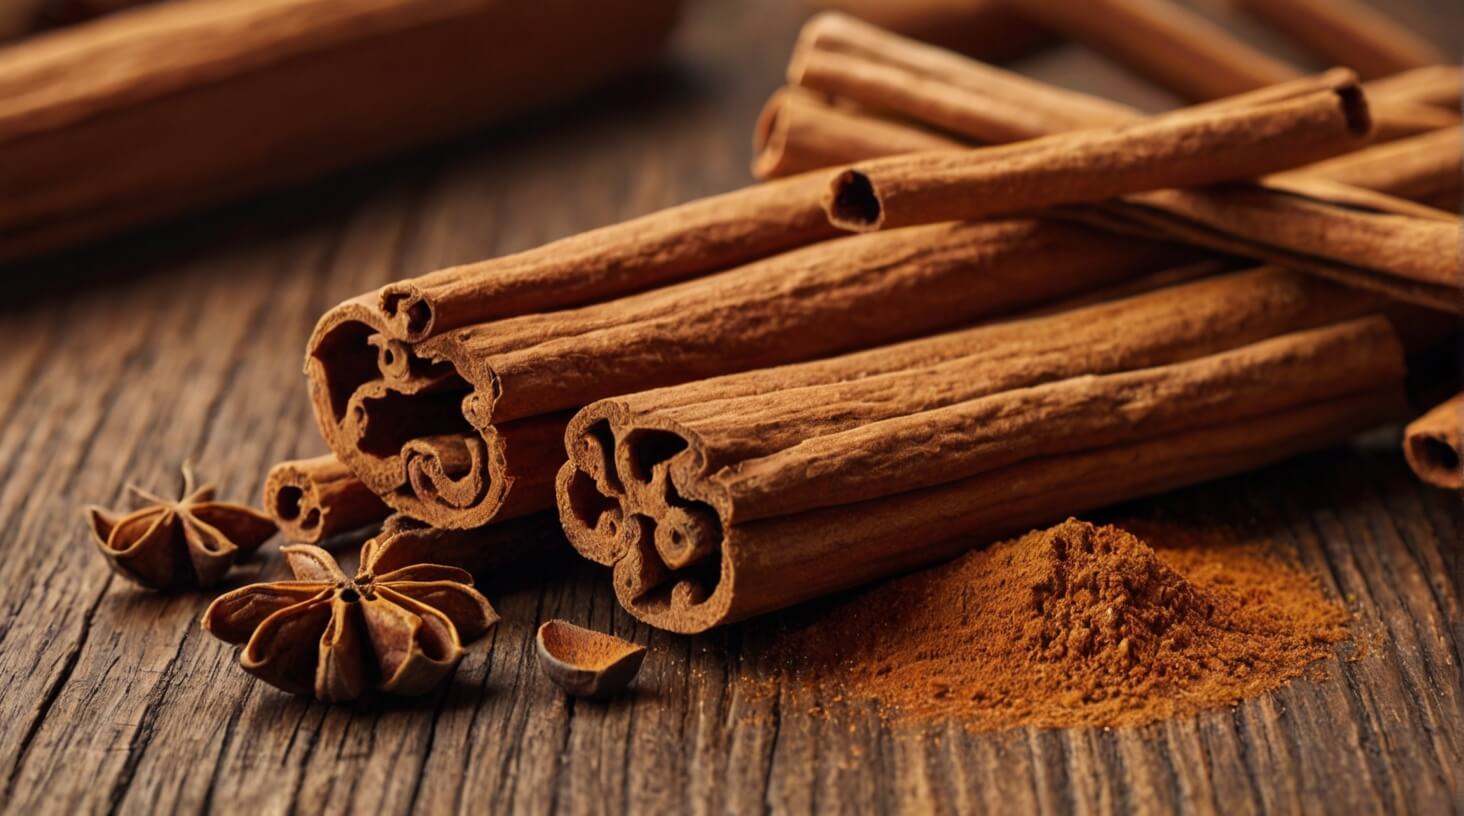 Close-up image of a pile of cinnamon sticks, showcasing the warm color and texture